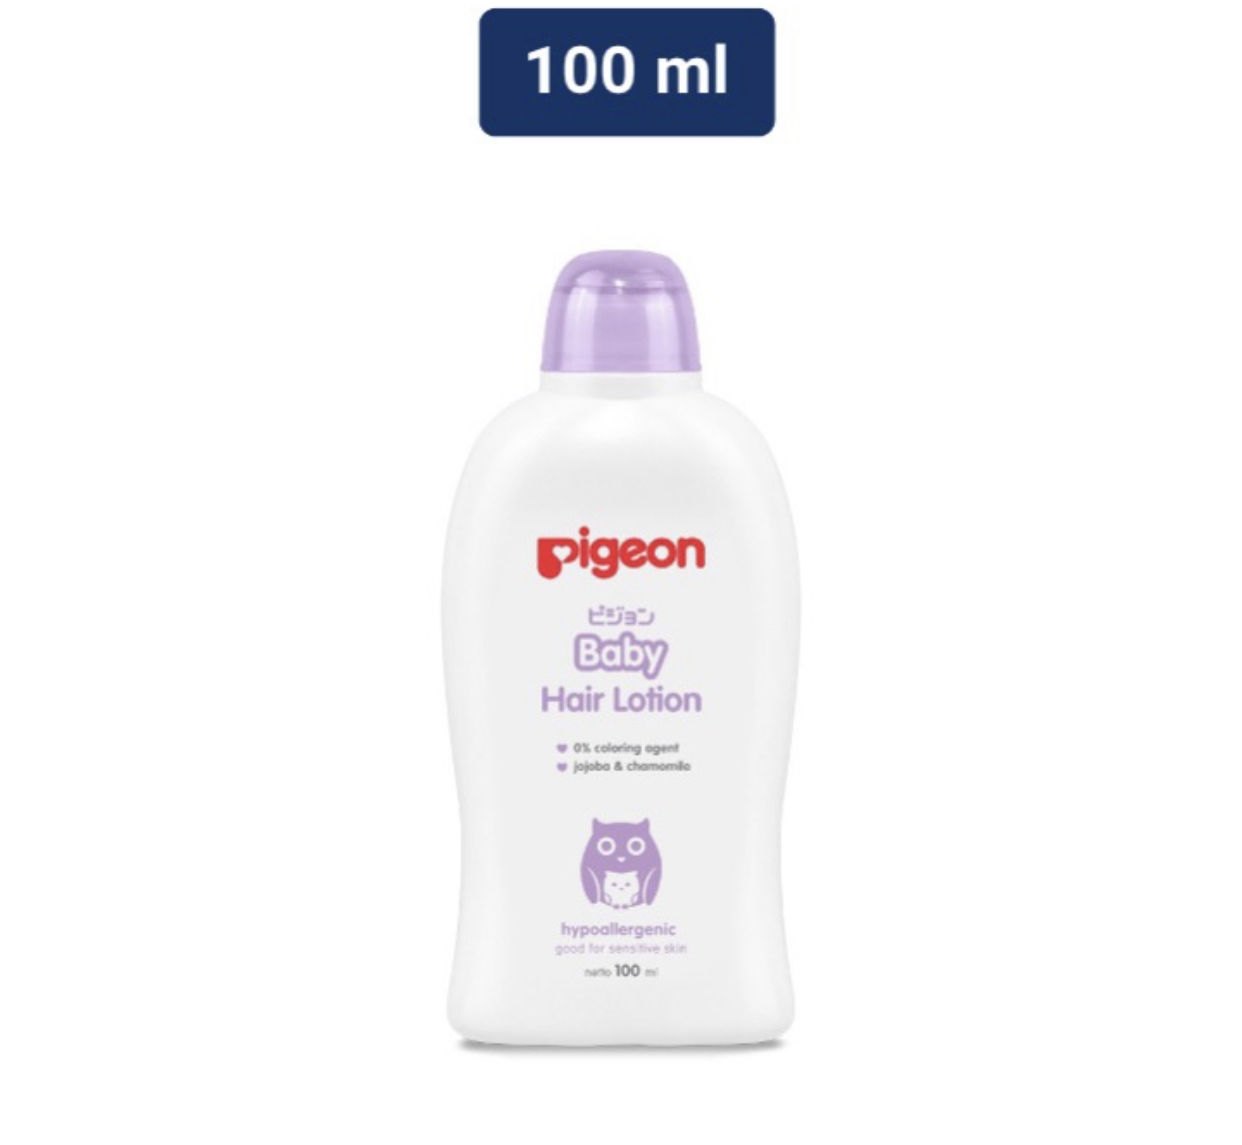 10. Pigeon Baby Hair Lotion